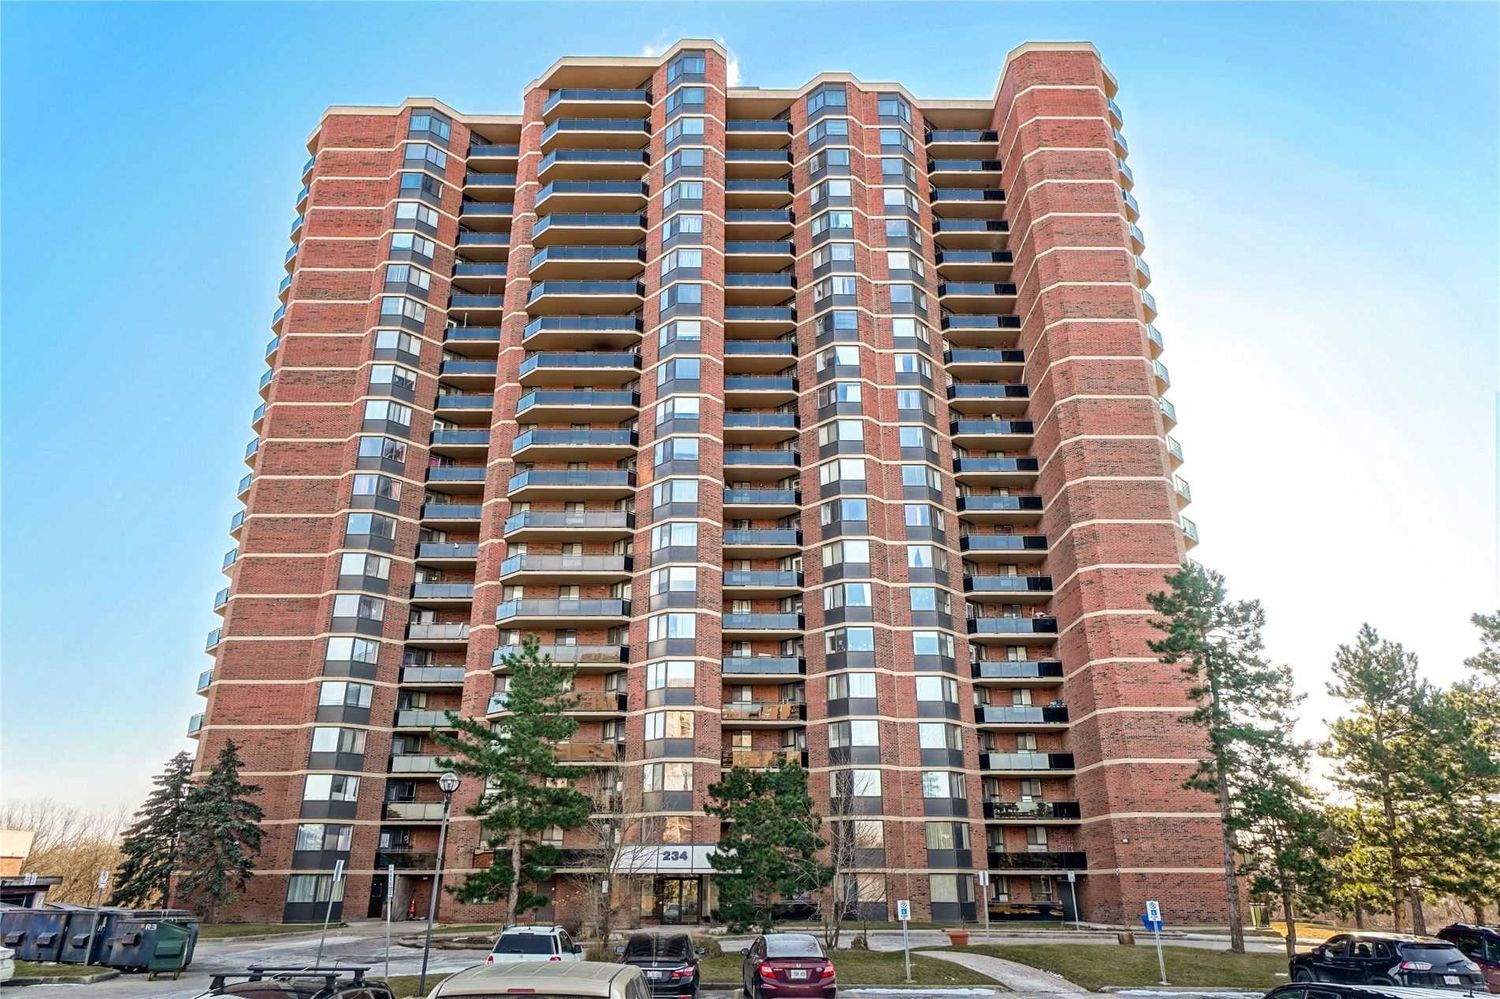 234 Albion Road. Twin Towers Condos is located in  Etobicoke, Toronto - image #1 of 3